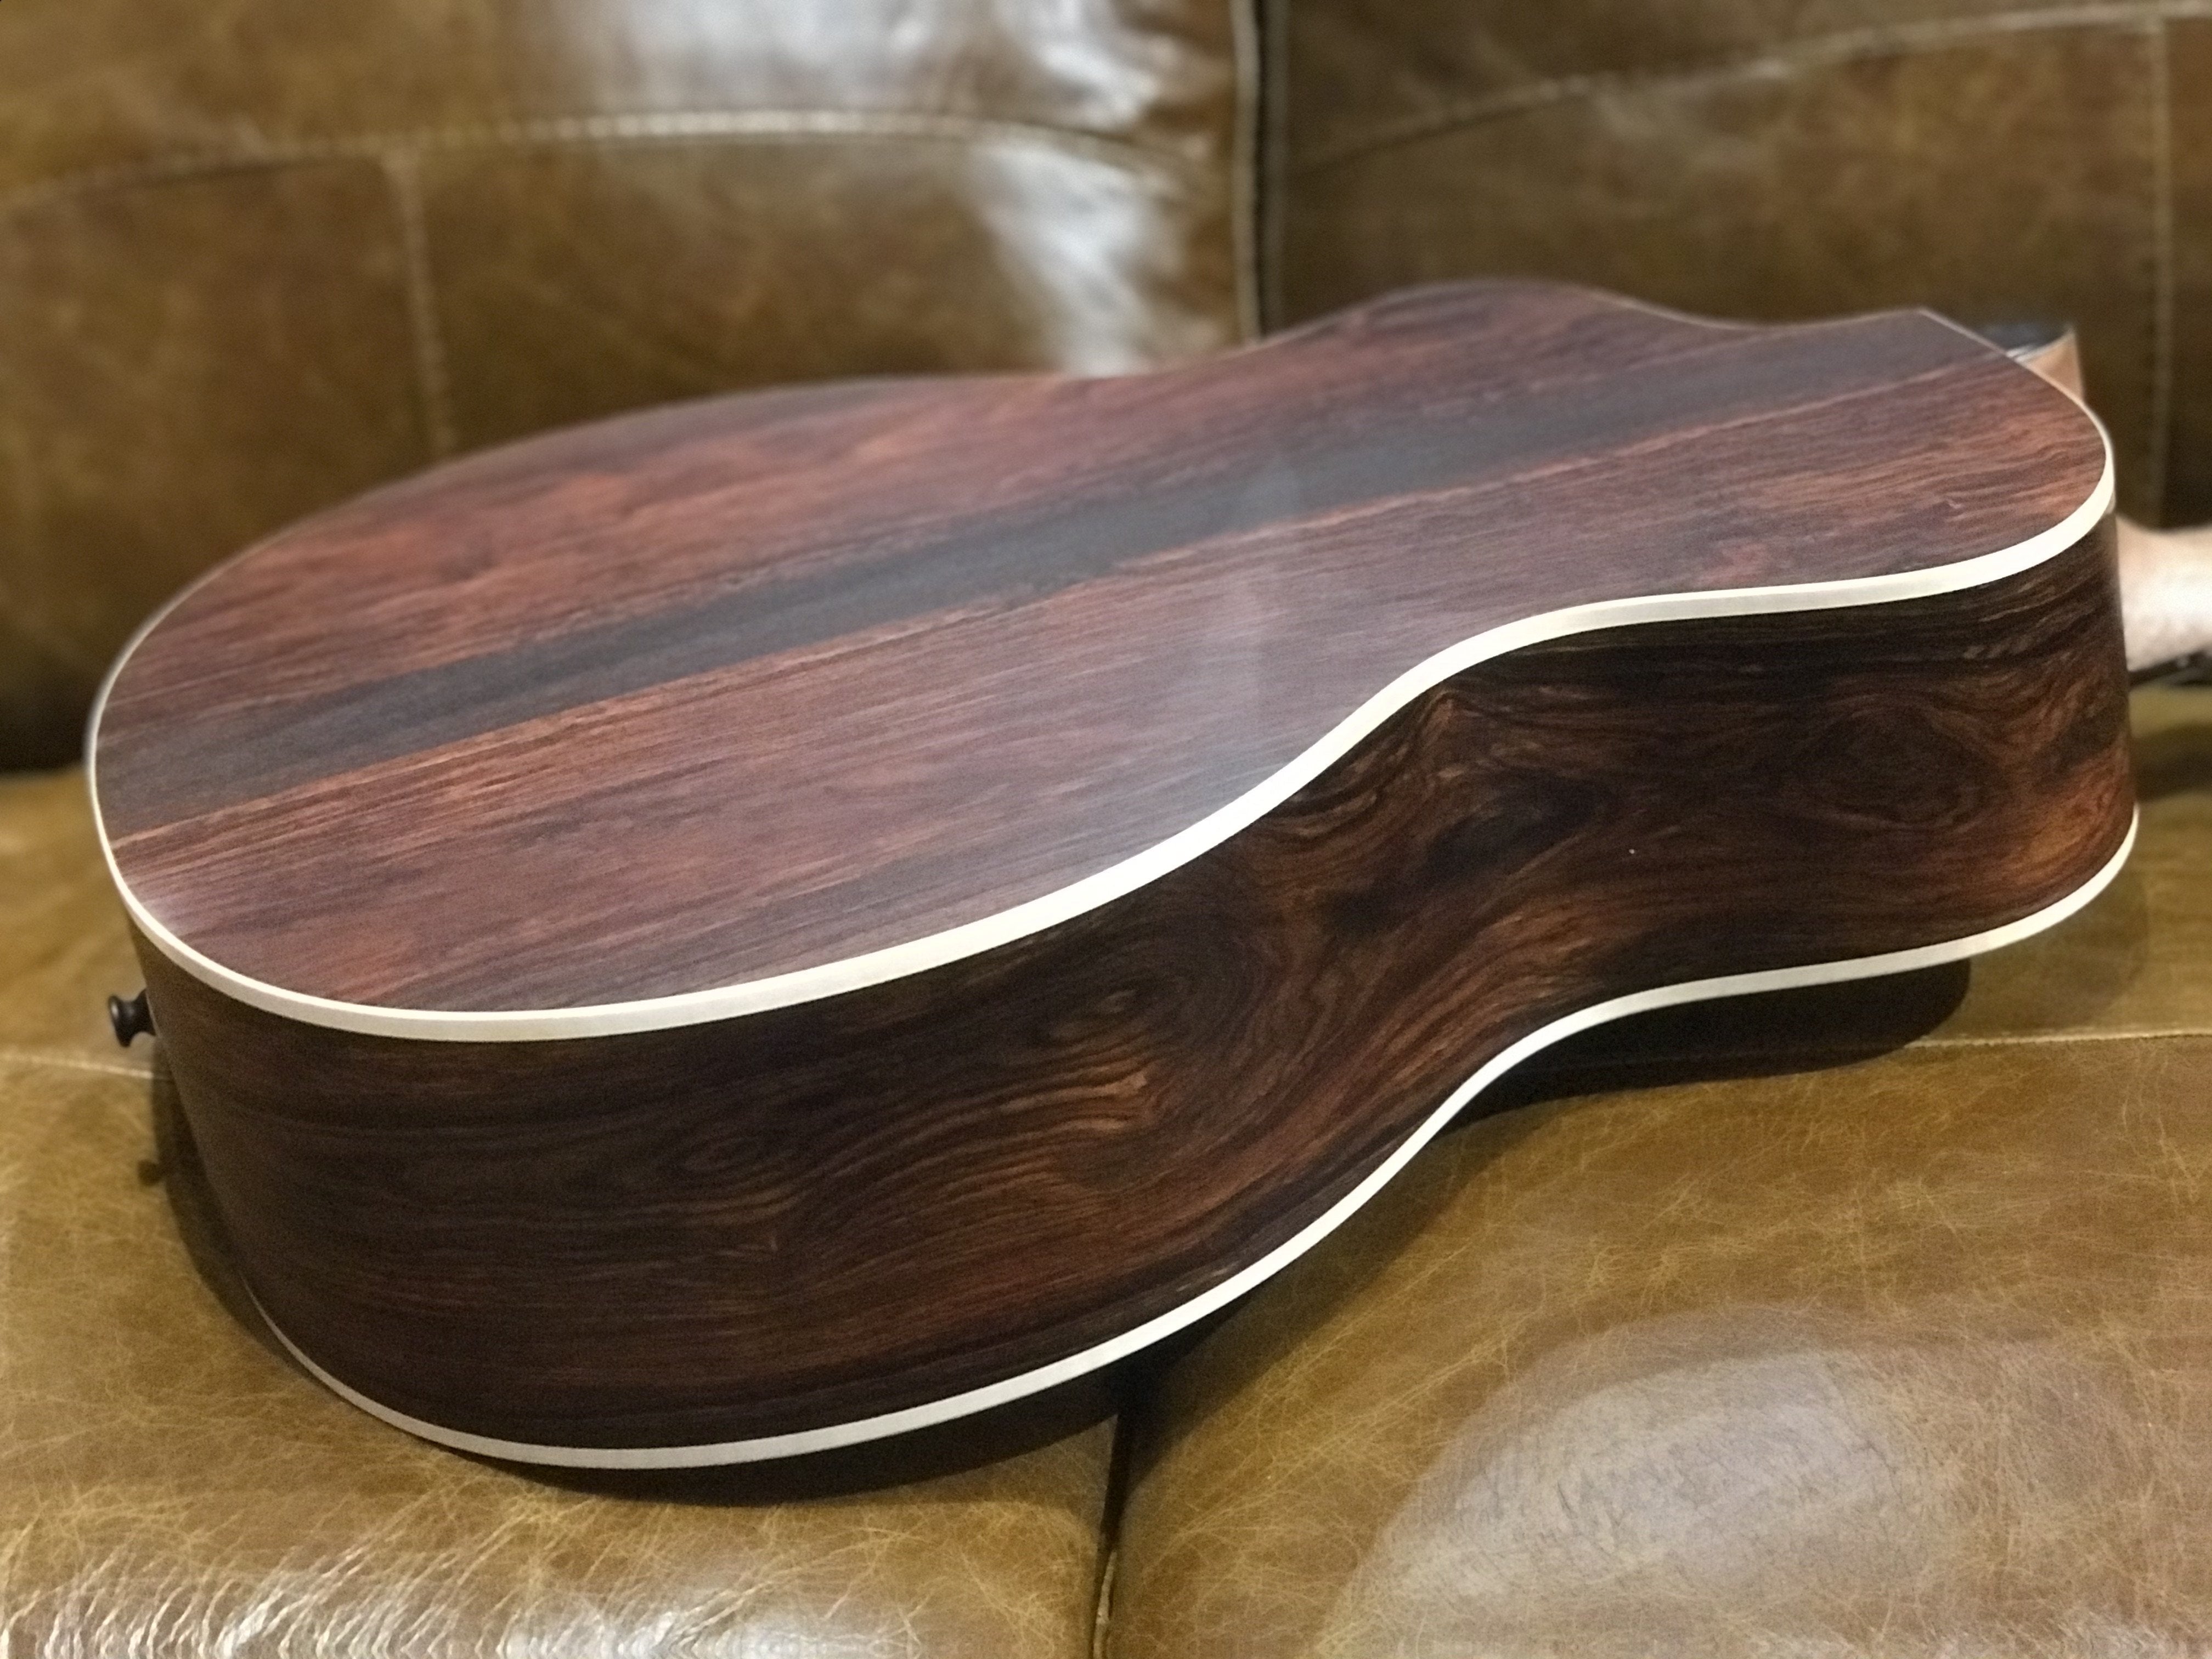 Dowina Cocobolo Trio Plate (Cocobolo III) D-SWS, Acoustic Guitar for sale at Richards Guitars.